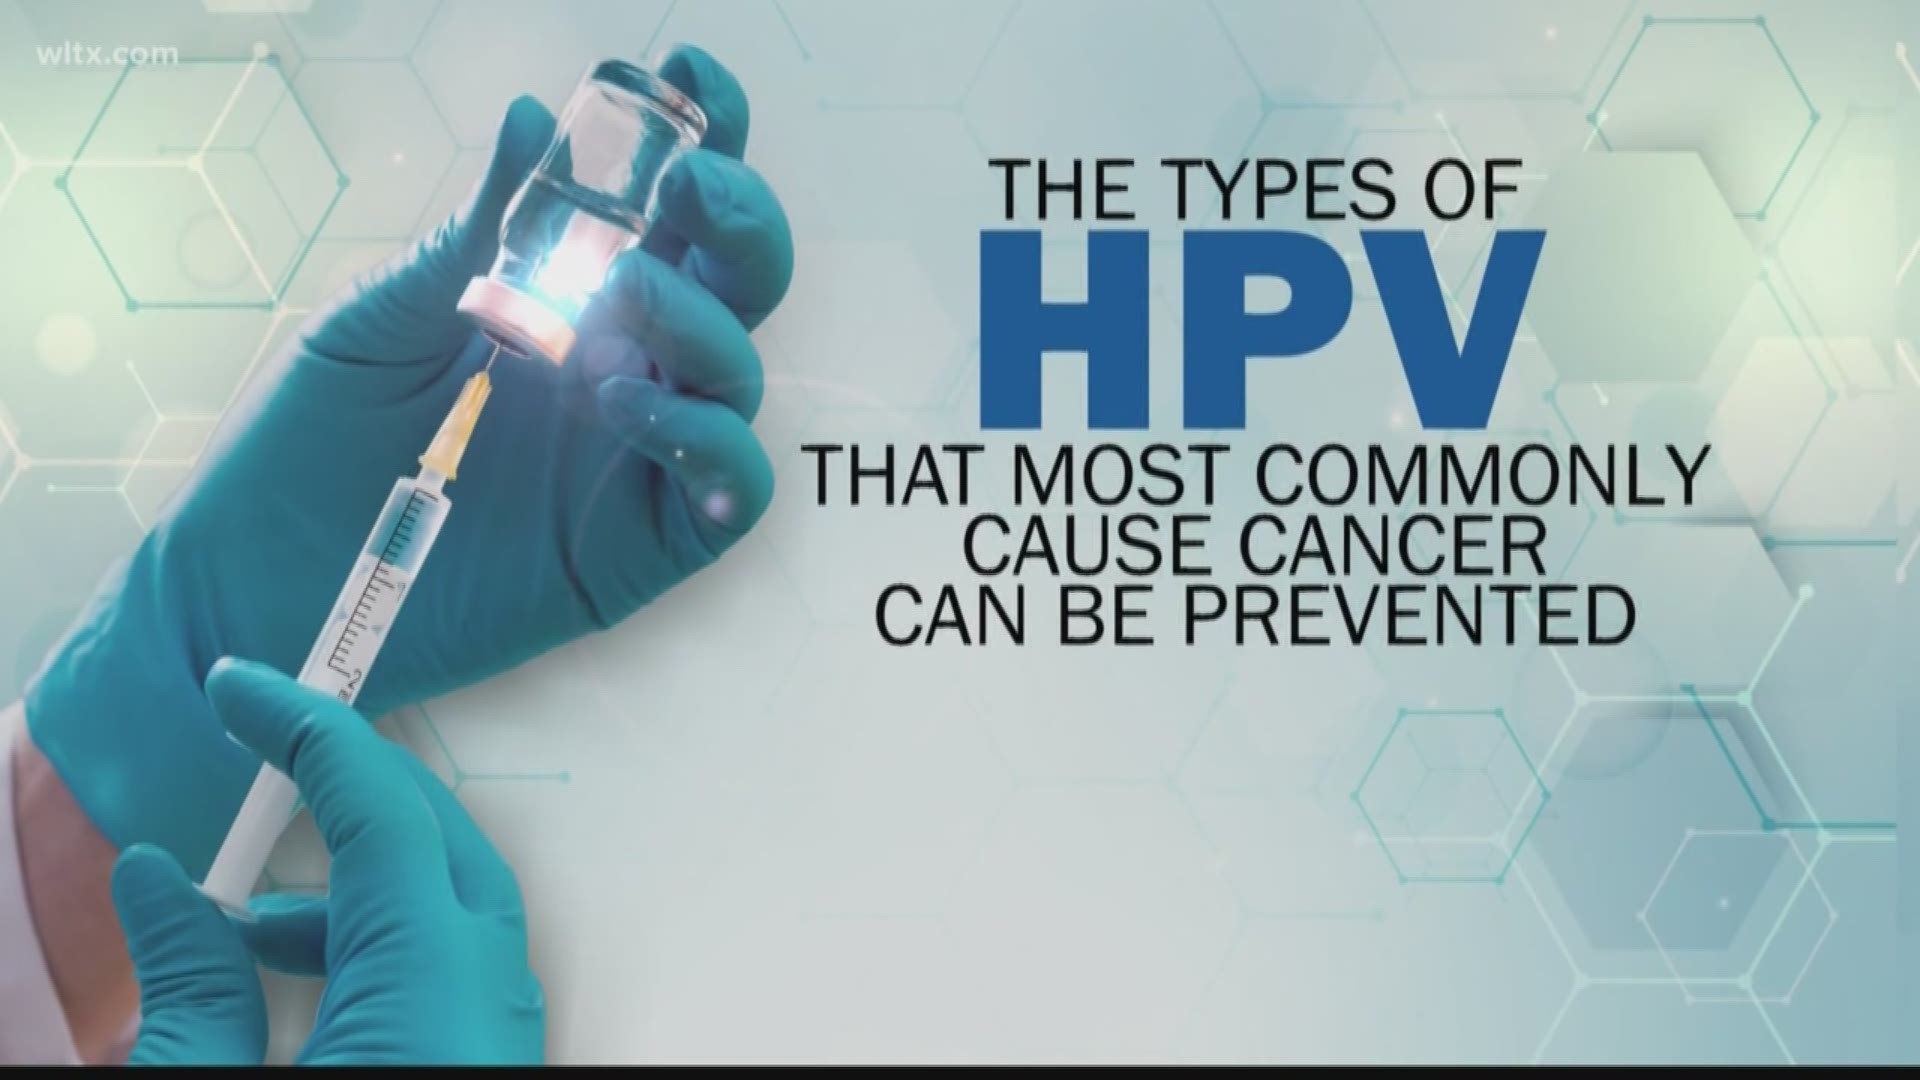 August is National Immunization Awareness month and WLTX speaks to a local gynecologist to get parents answers about the HPV vaccine.